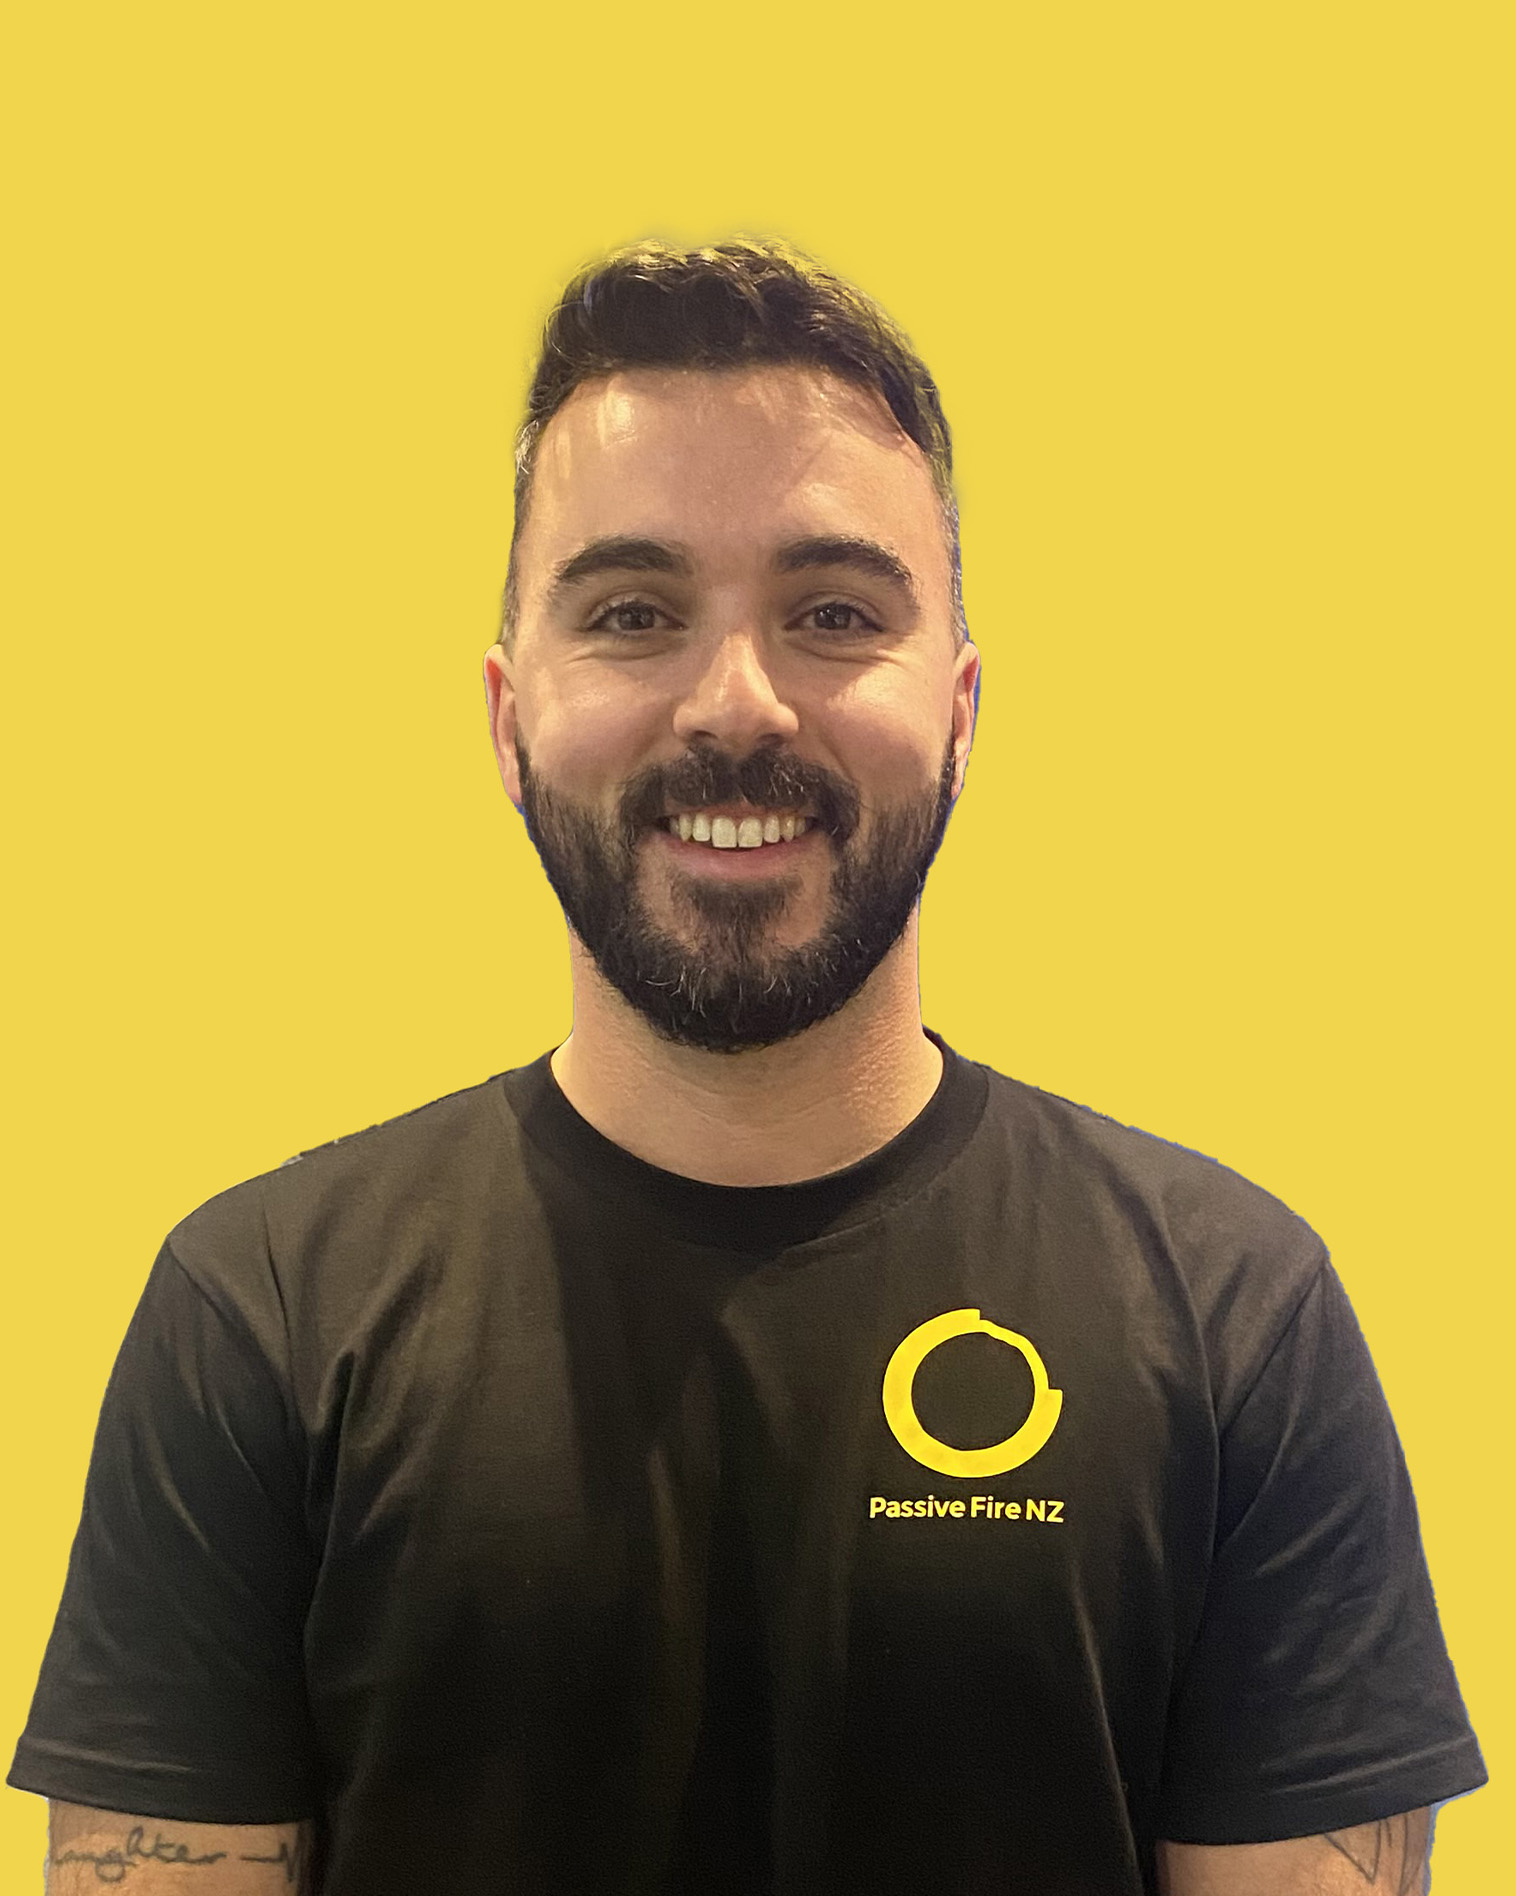 Pedro Costa – Service Manager at Passive Fire NZ